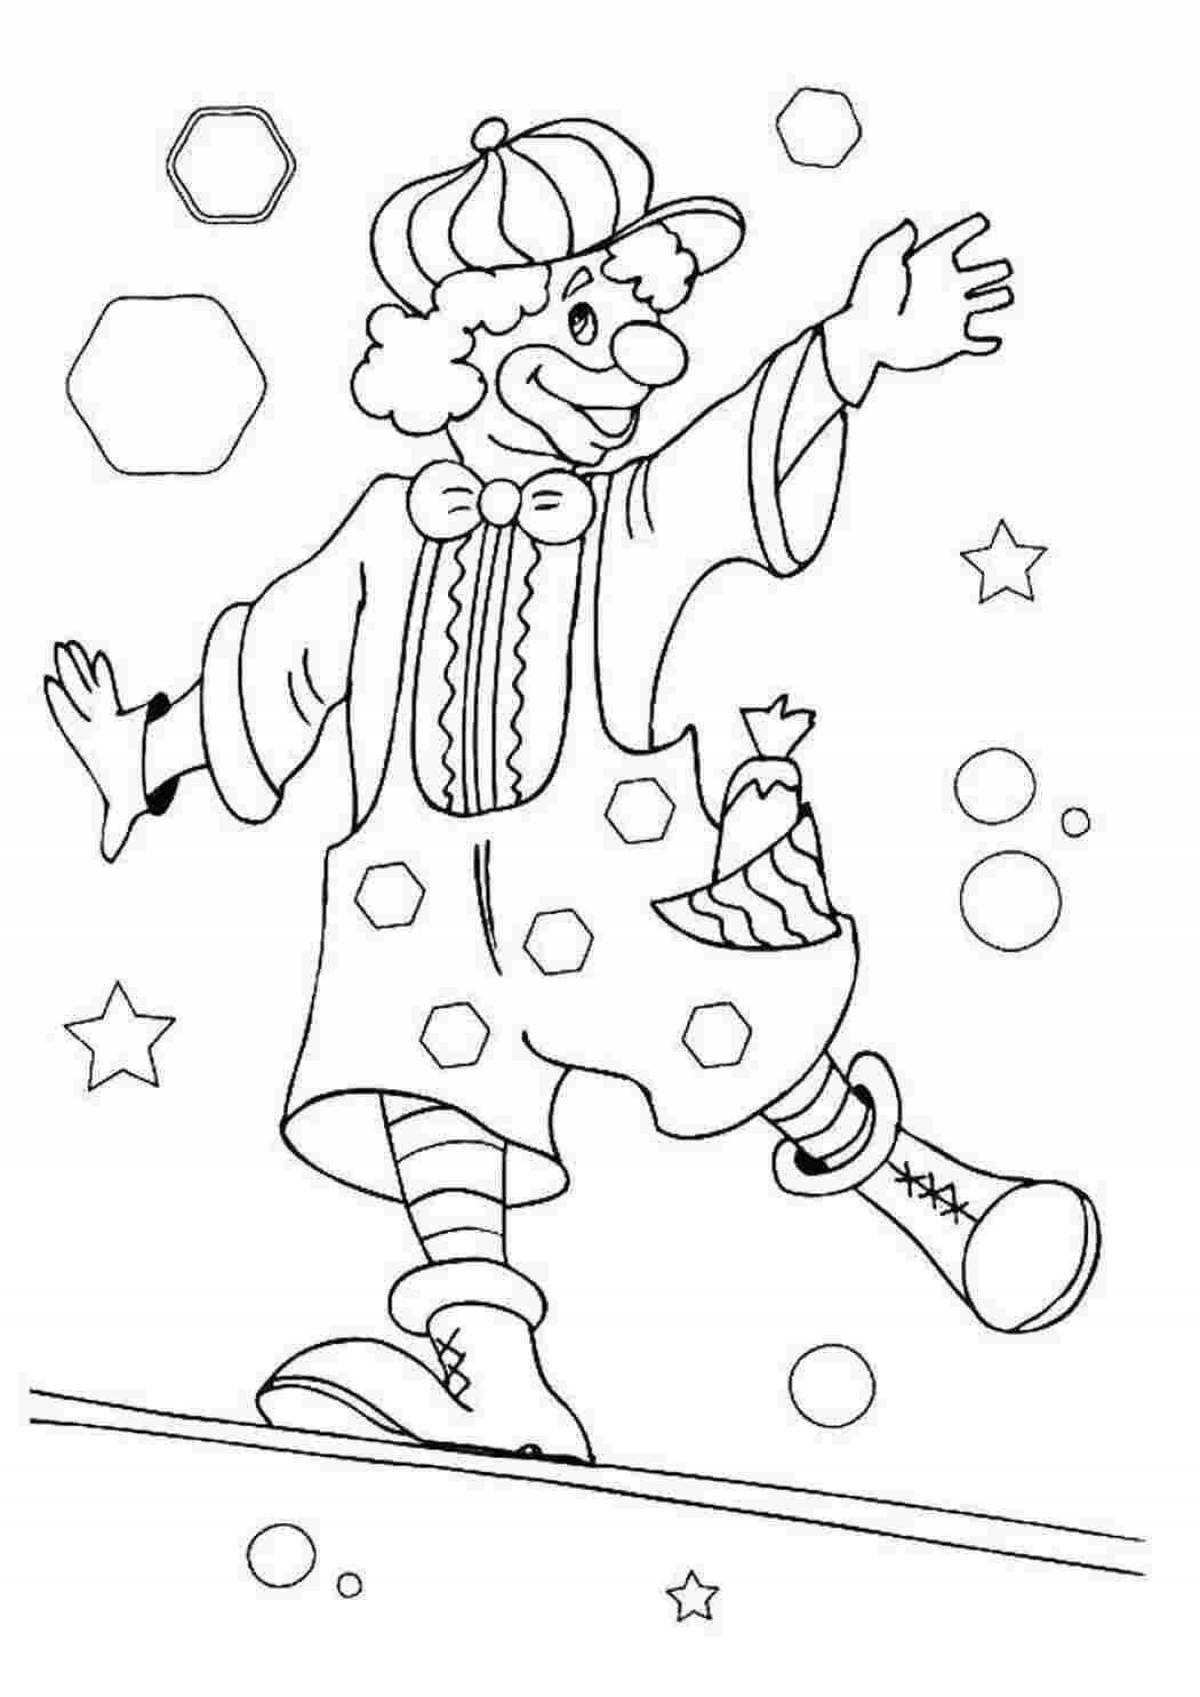 Adorable jester coloring book for kids